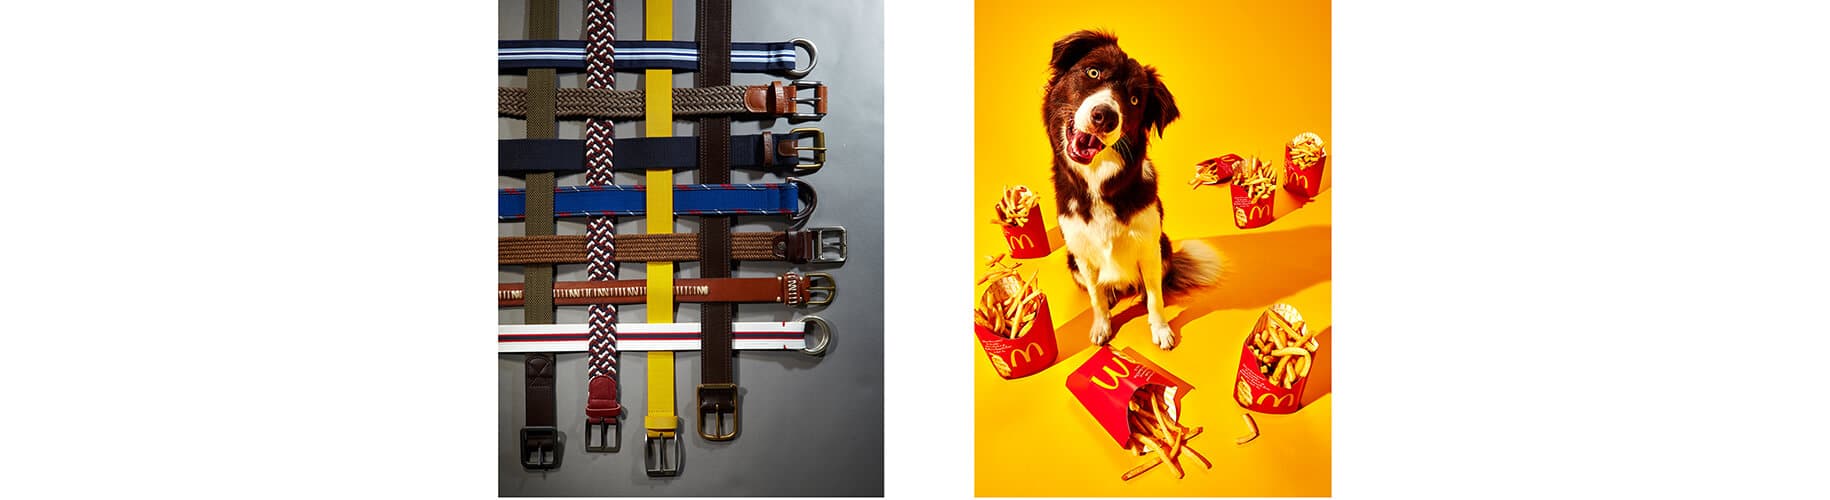 a photo of belts and another photo of a dog surrounded by McDonald's fries